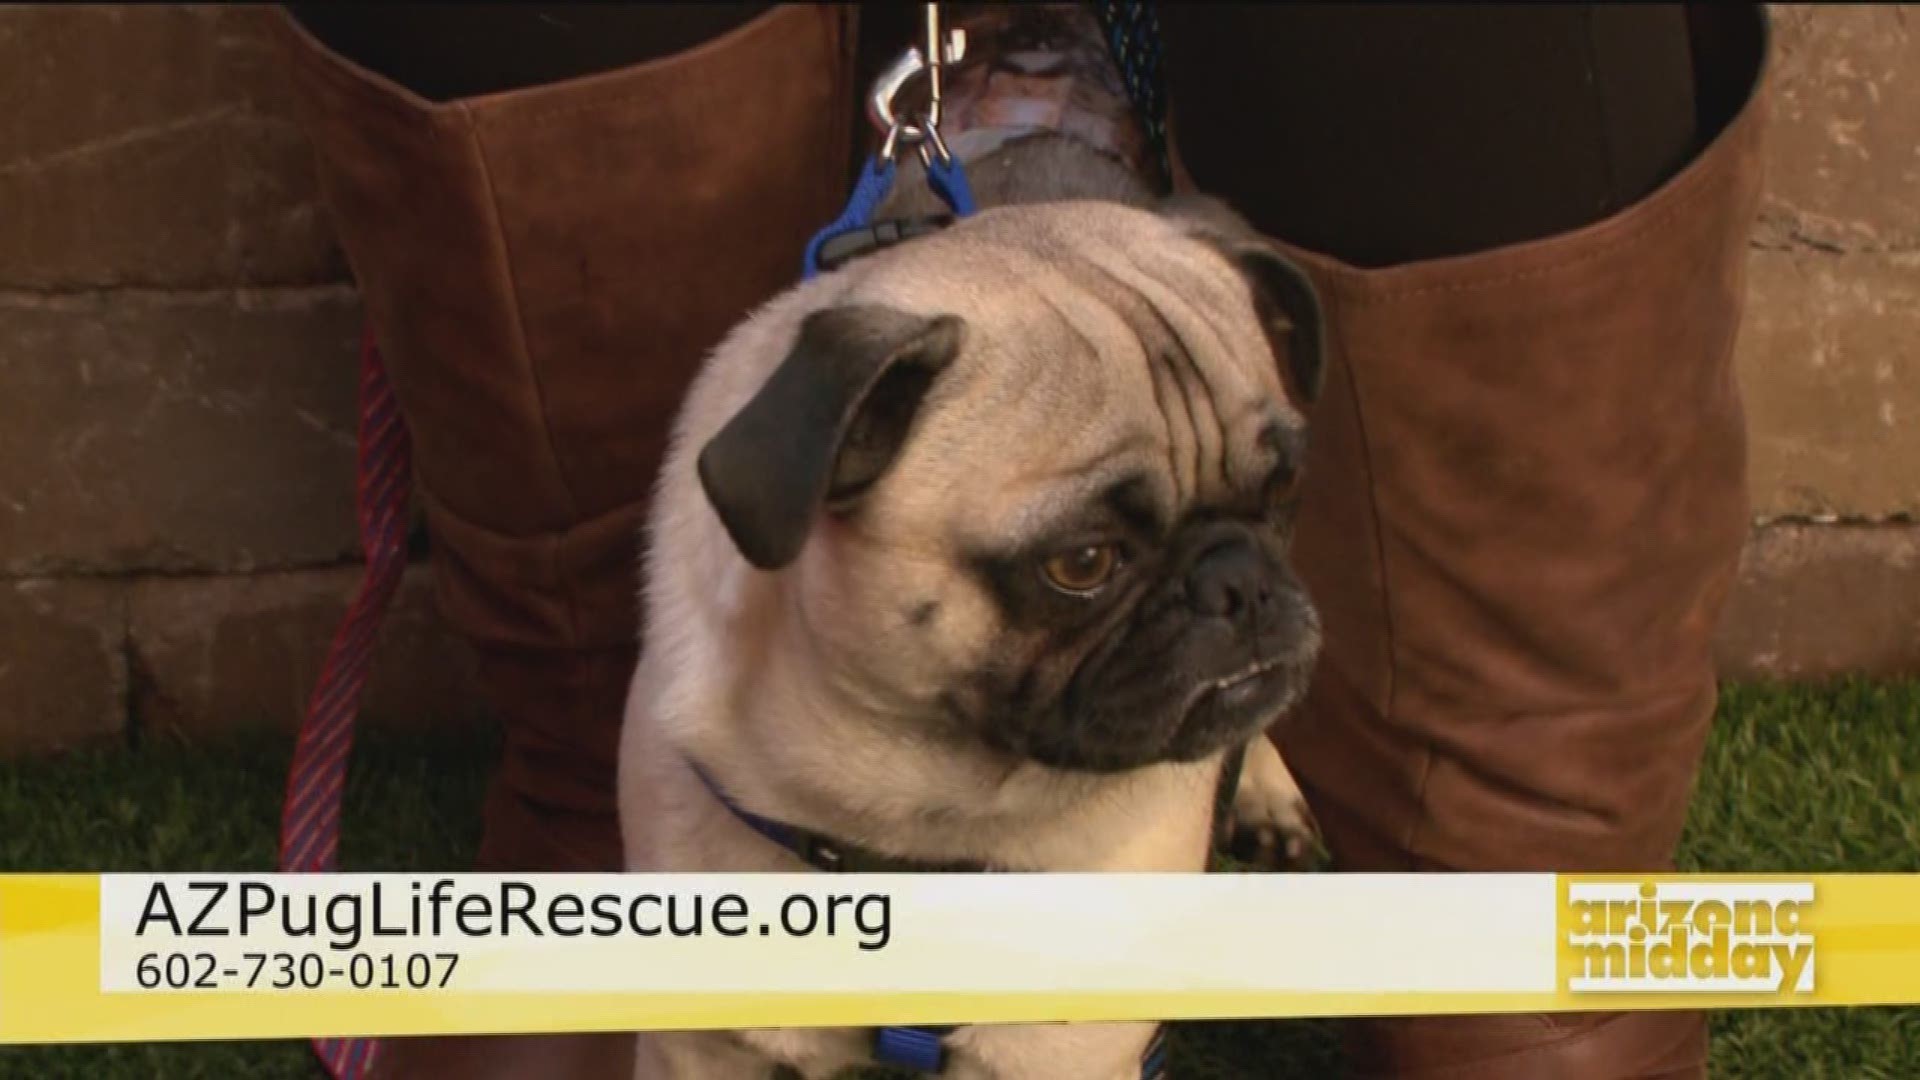 Susan of AZPUGLifeRescue.org gives us the scoop on pug adoptions and we meet an adorable duo!